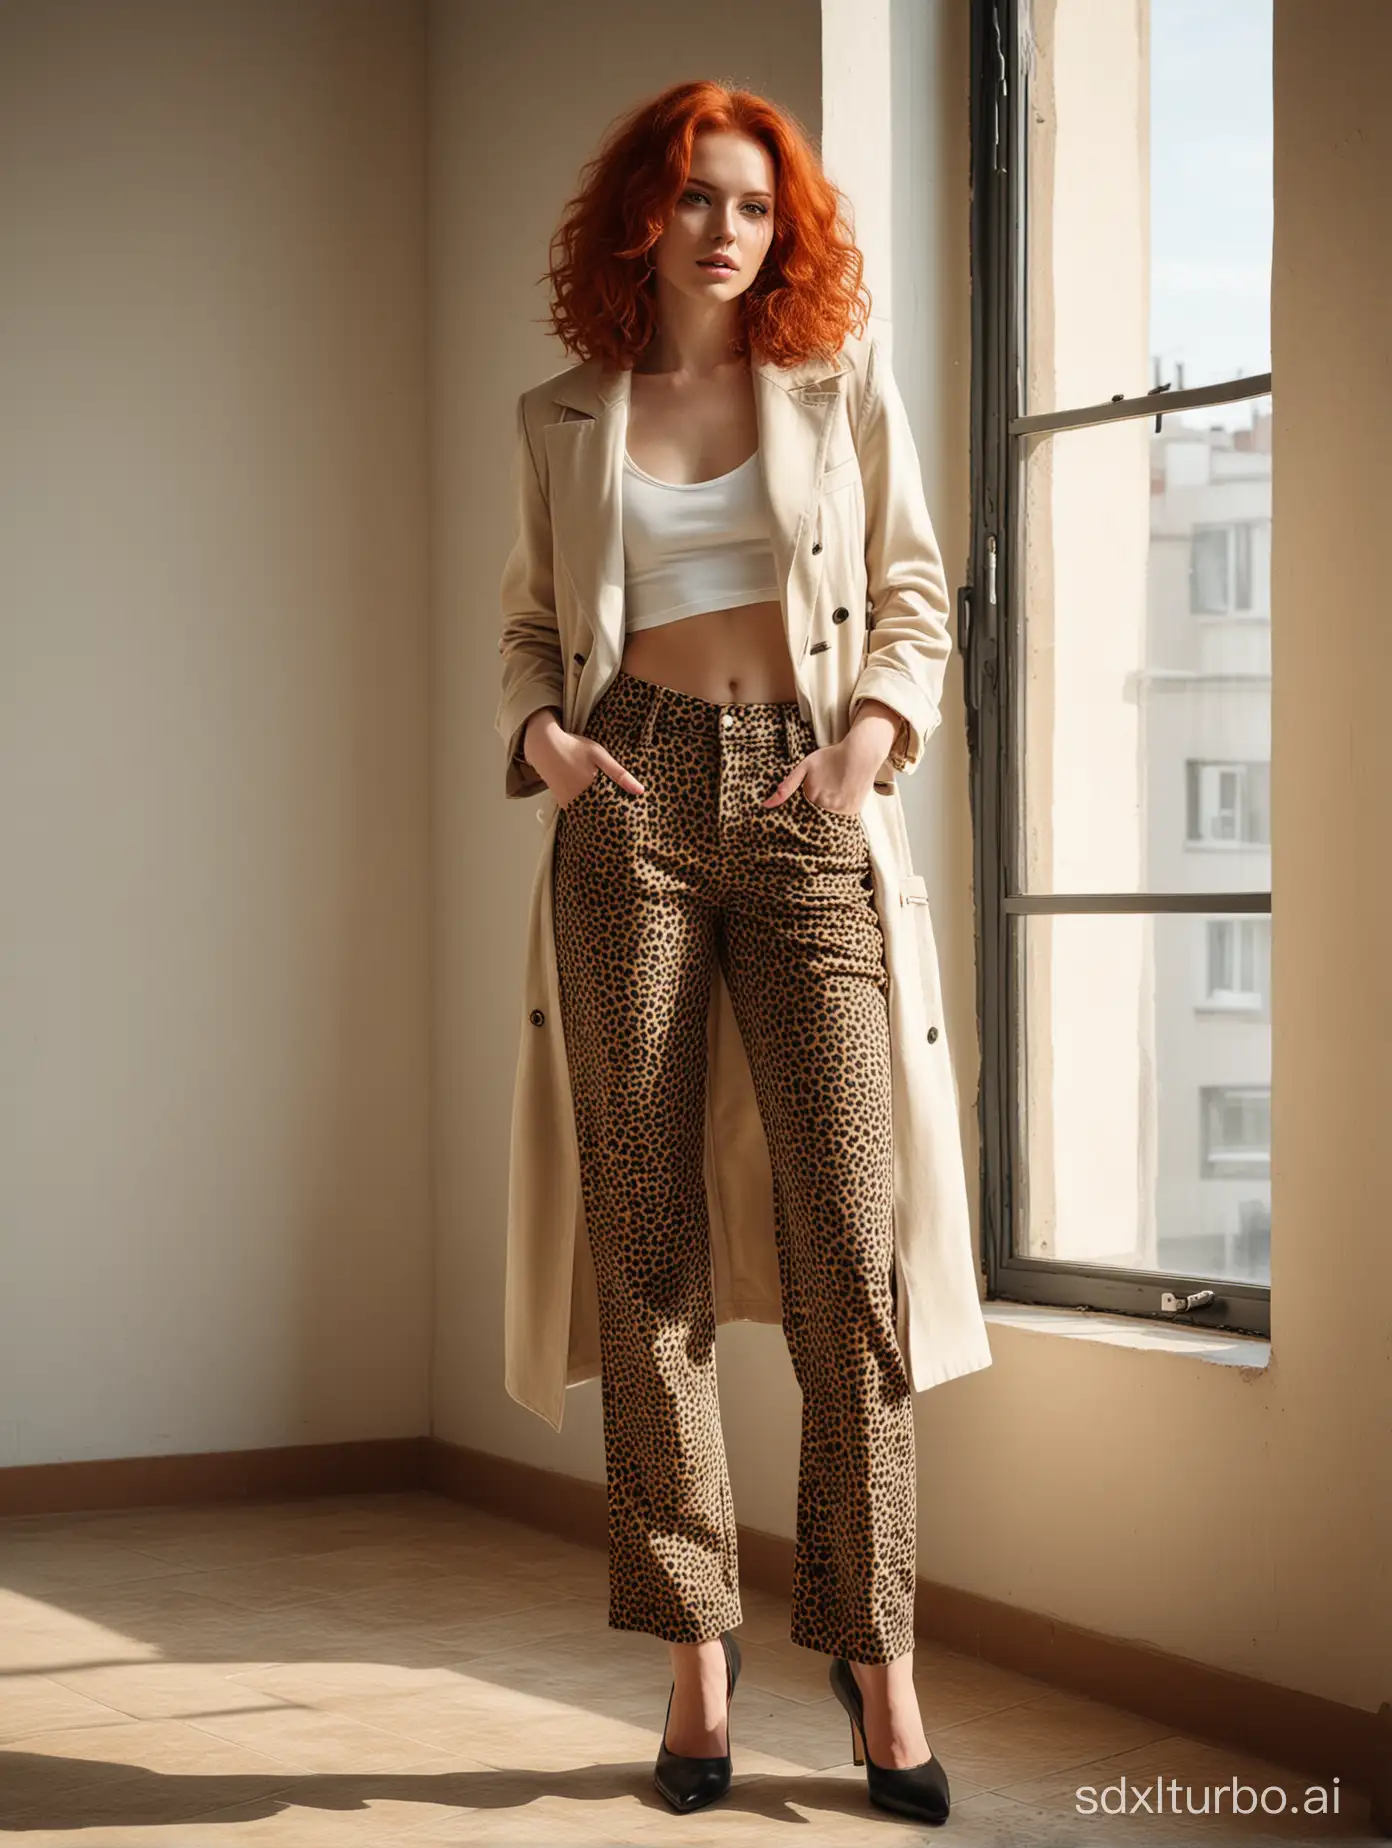 fashion photo. red hair young woman. posing. In long leopard print palazzo jeans, crop top and oversize beige coat on top. Photo on a cyclorama and with shadows from a large window. full-length photo. Hasselblad x1d. direct sunlight. --style raw.